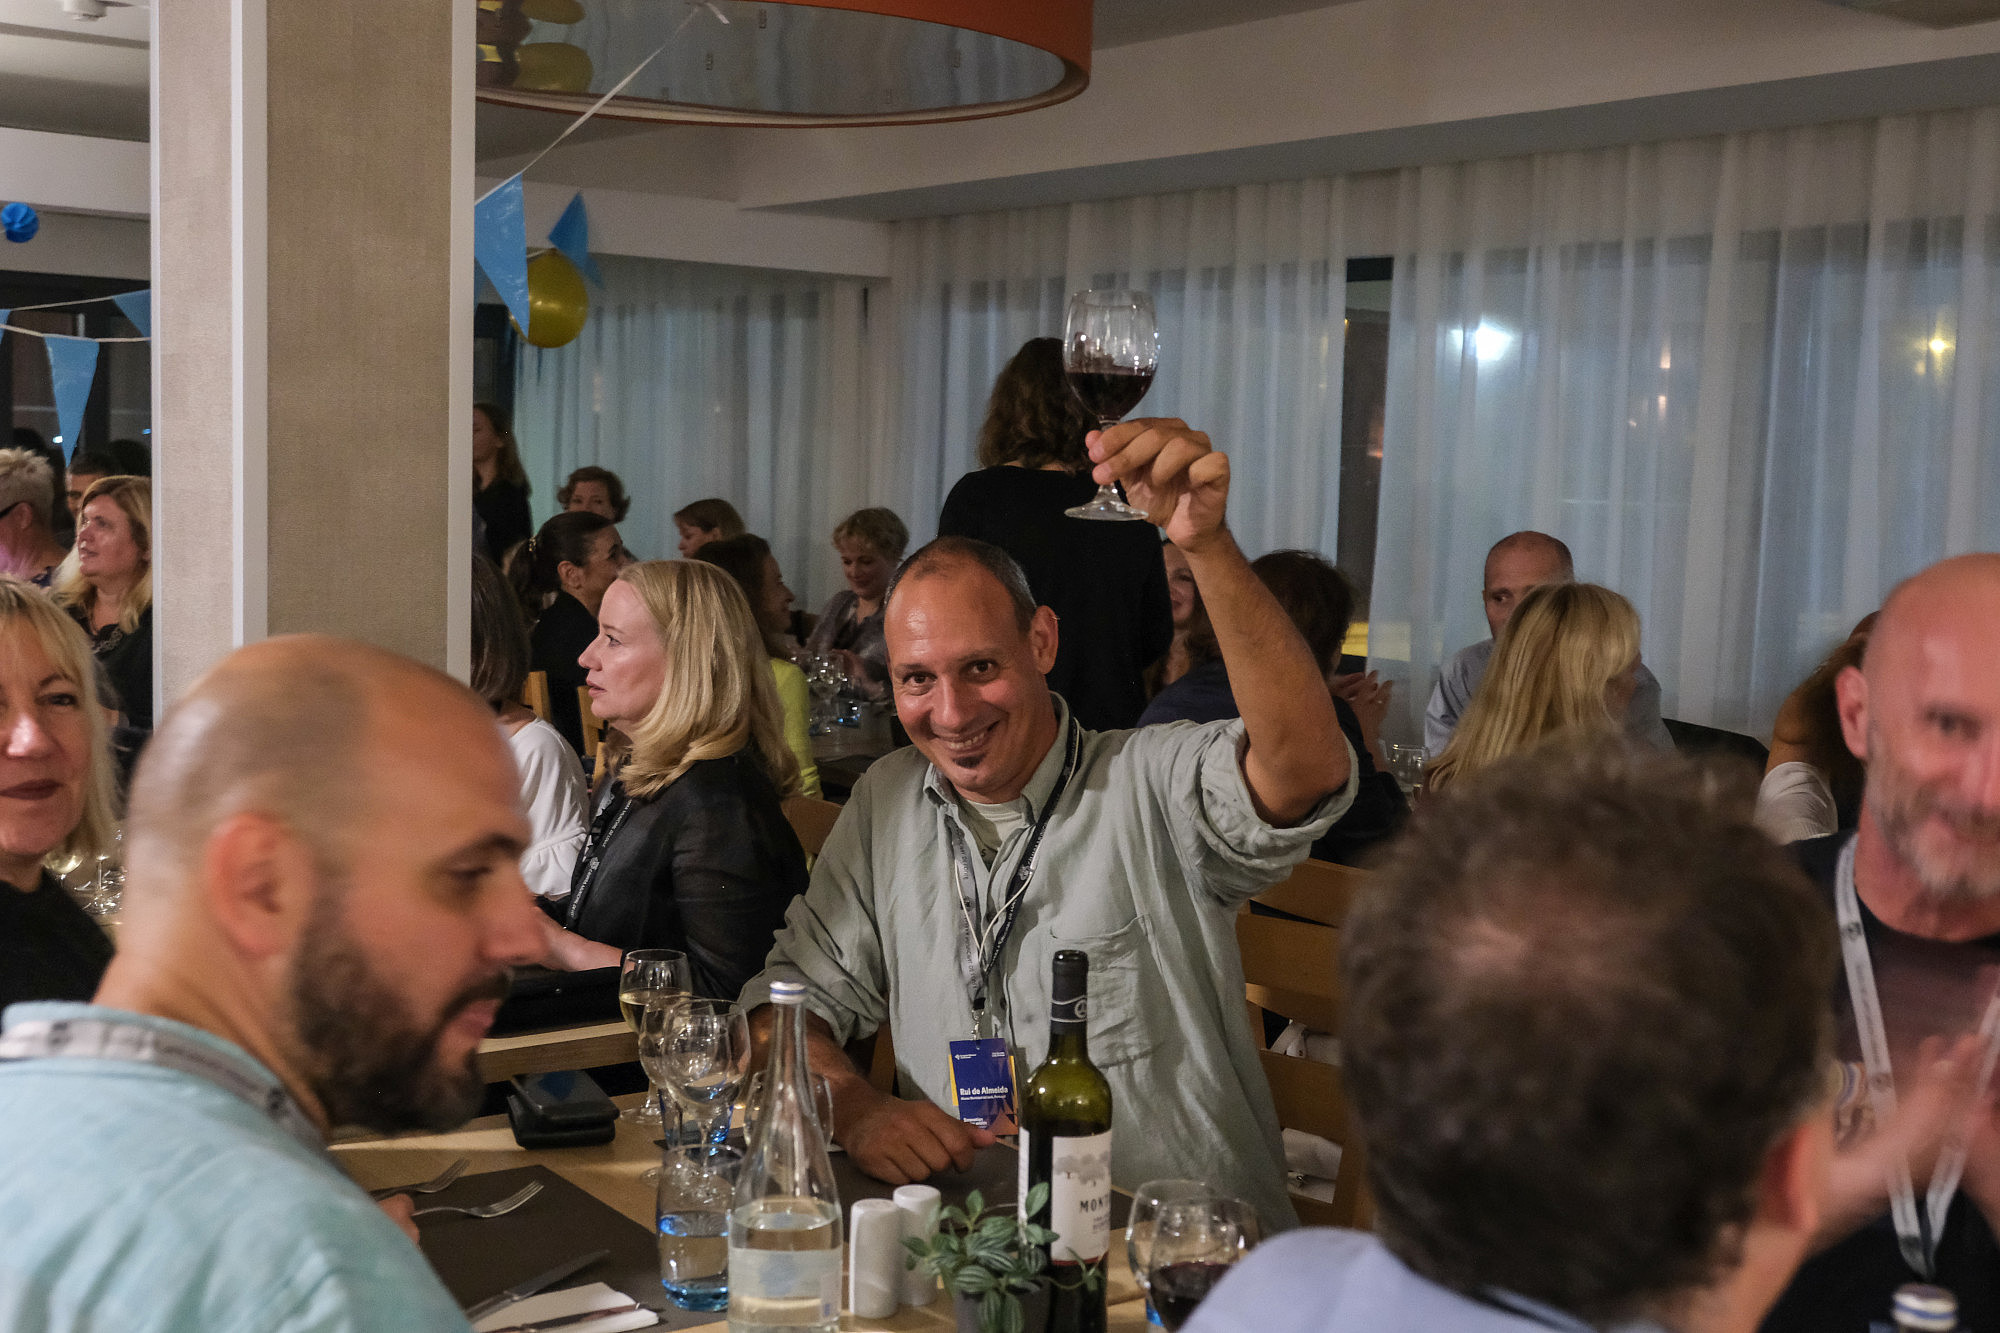 People are sitting at a restaurant table and talk to each other. In the middle of the picture one person is raising their glass and looks directly at the camera.   © Image: Jorge Gomes